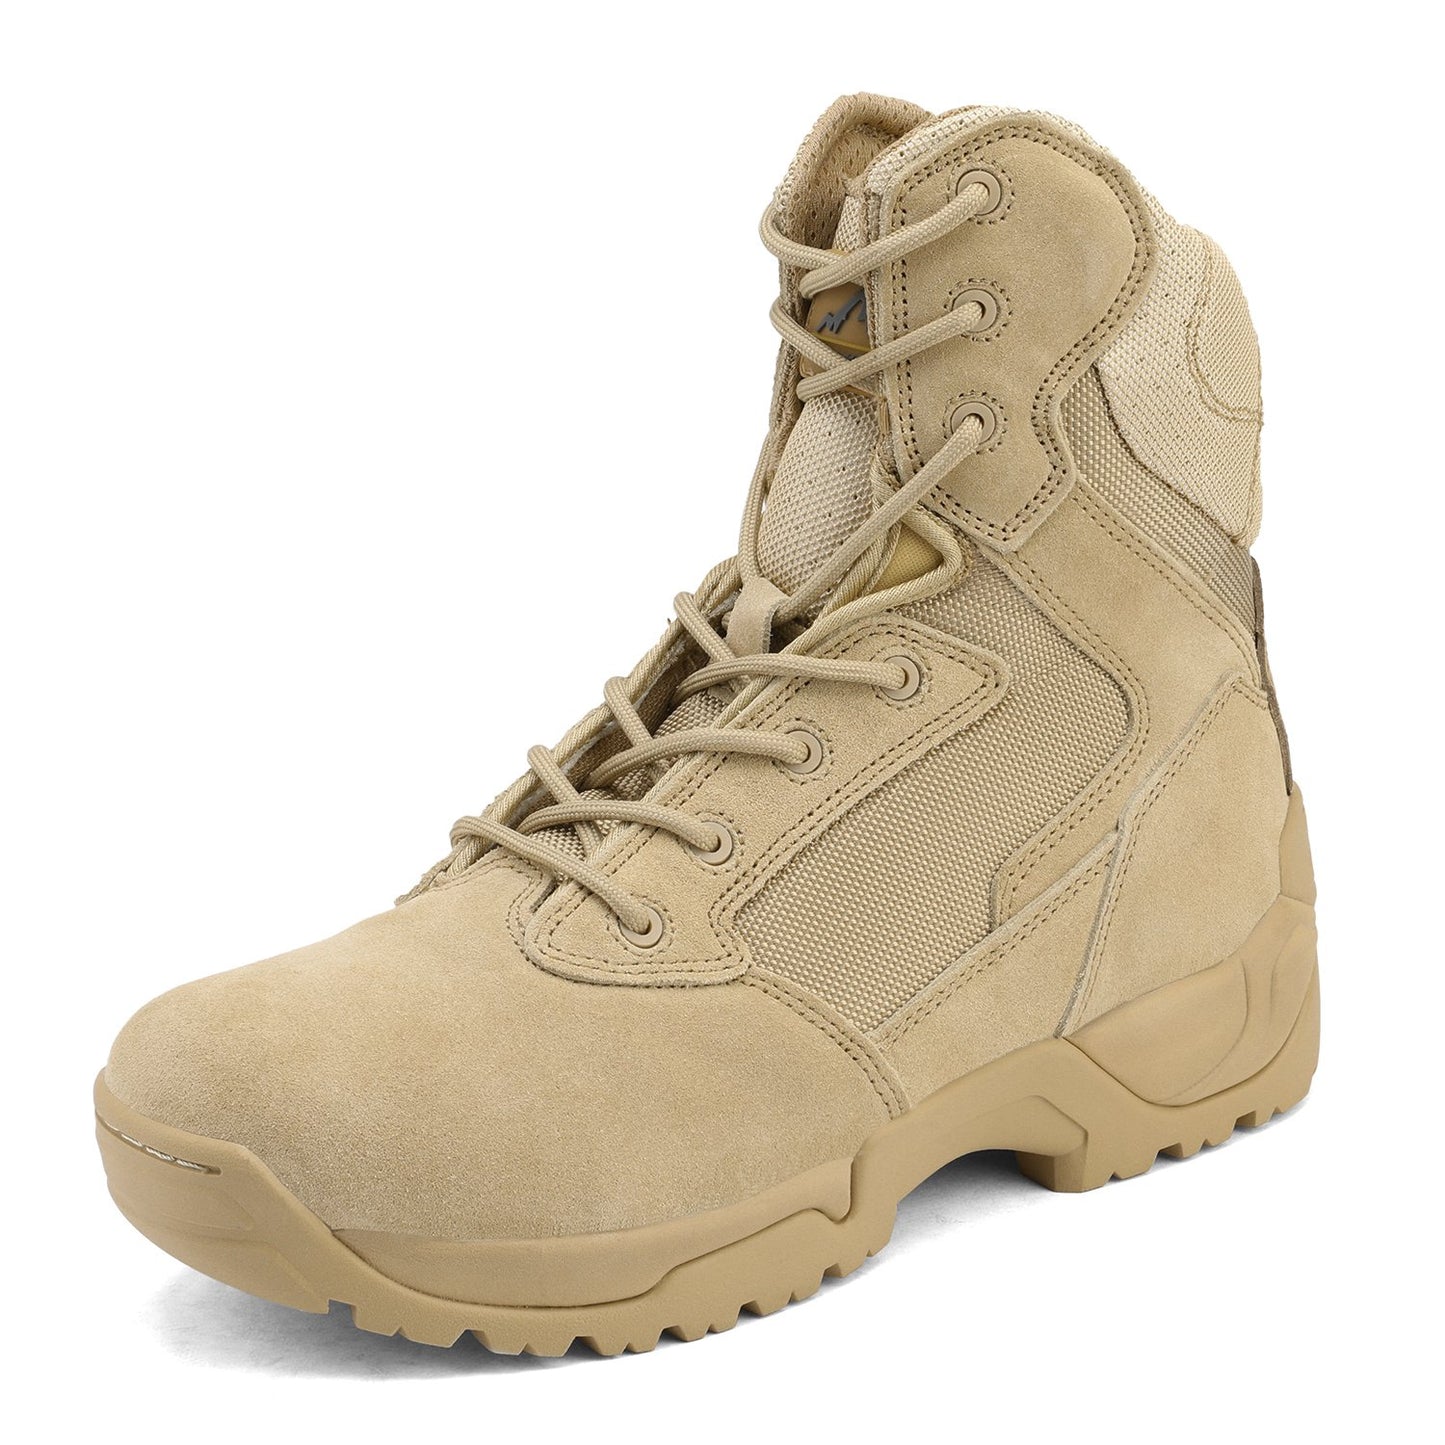 GGD Men's Military Tactical Boots.